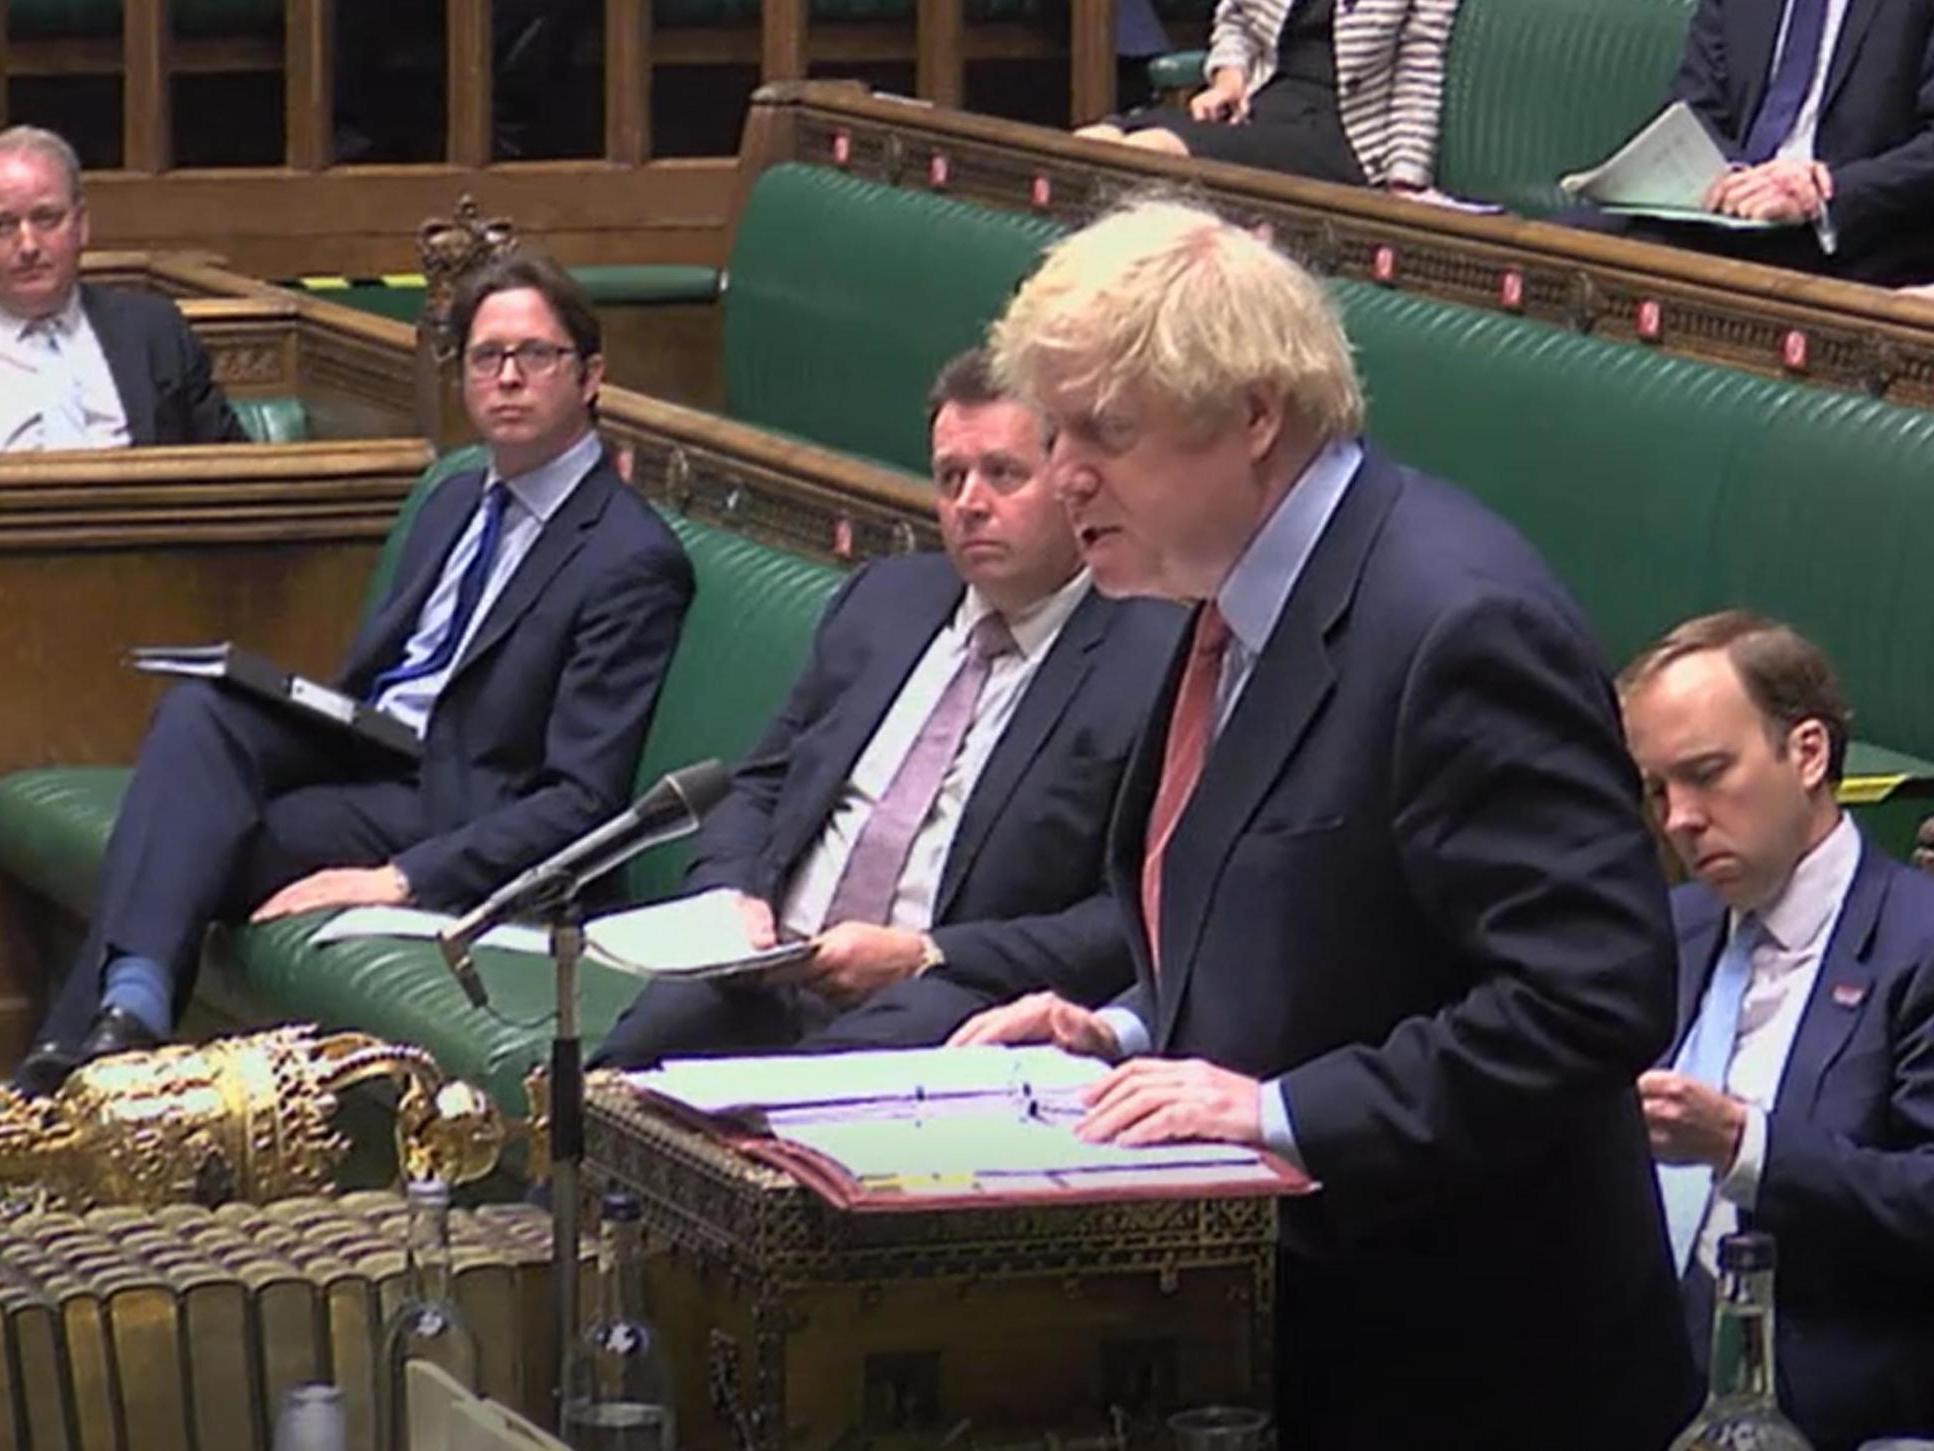 Boris Johnson had defended the policy at PMQs before changing his mind